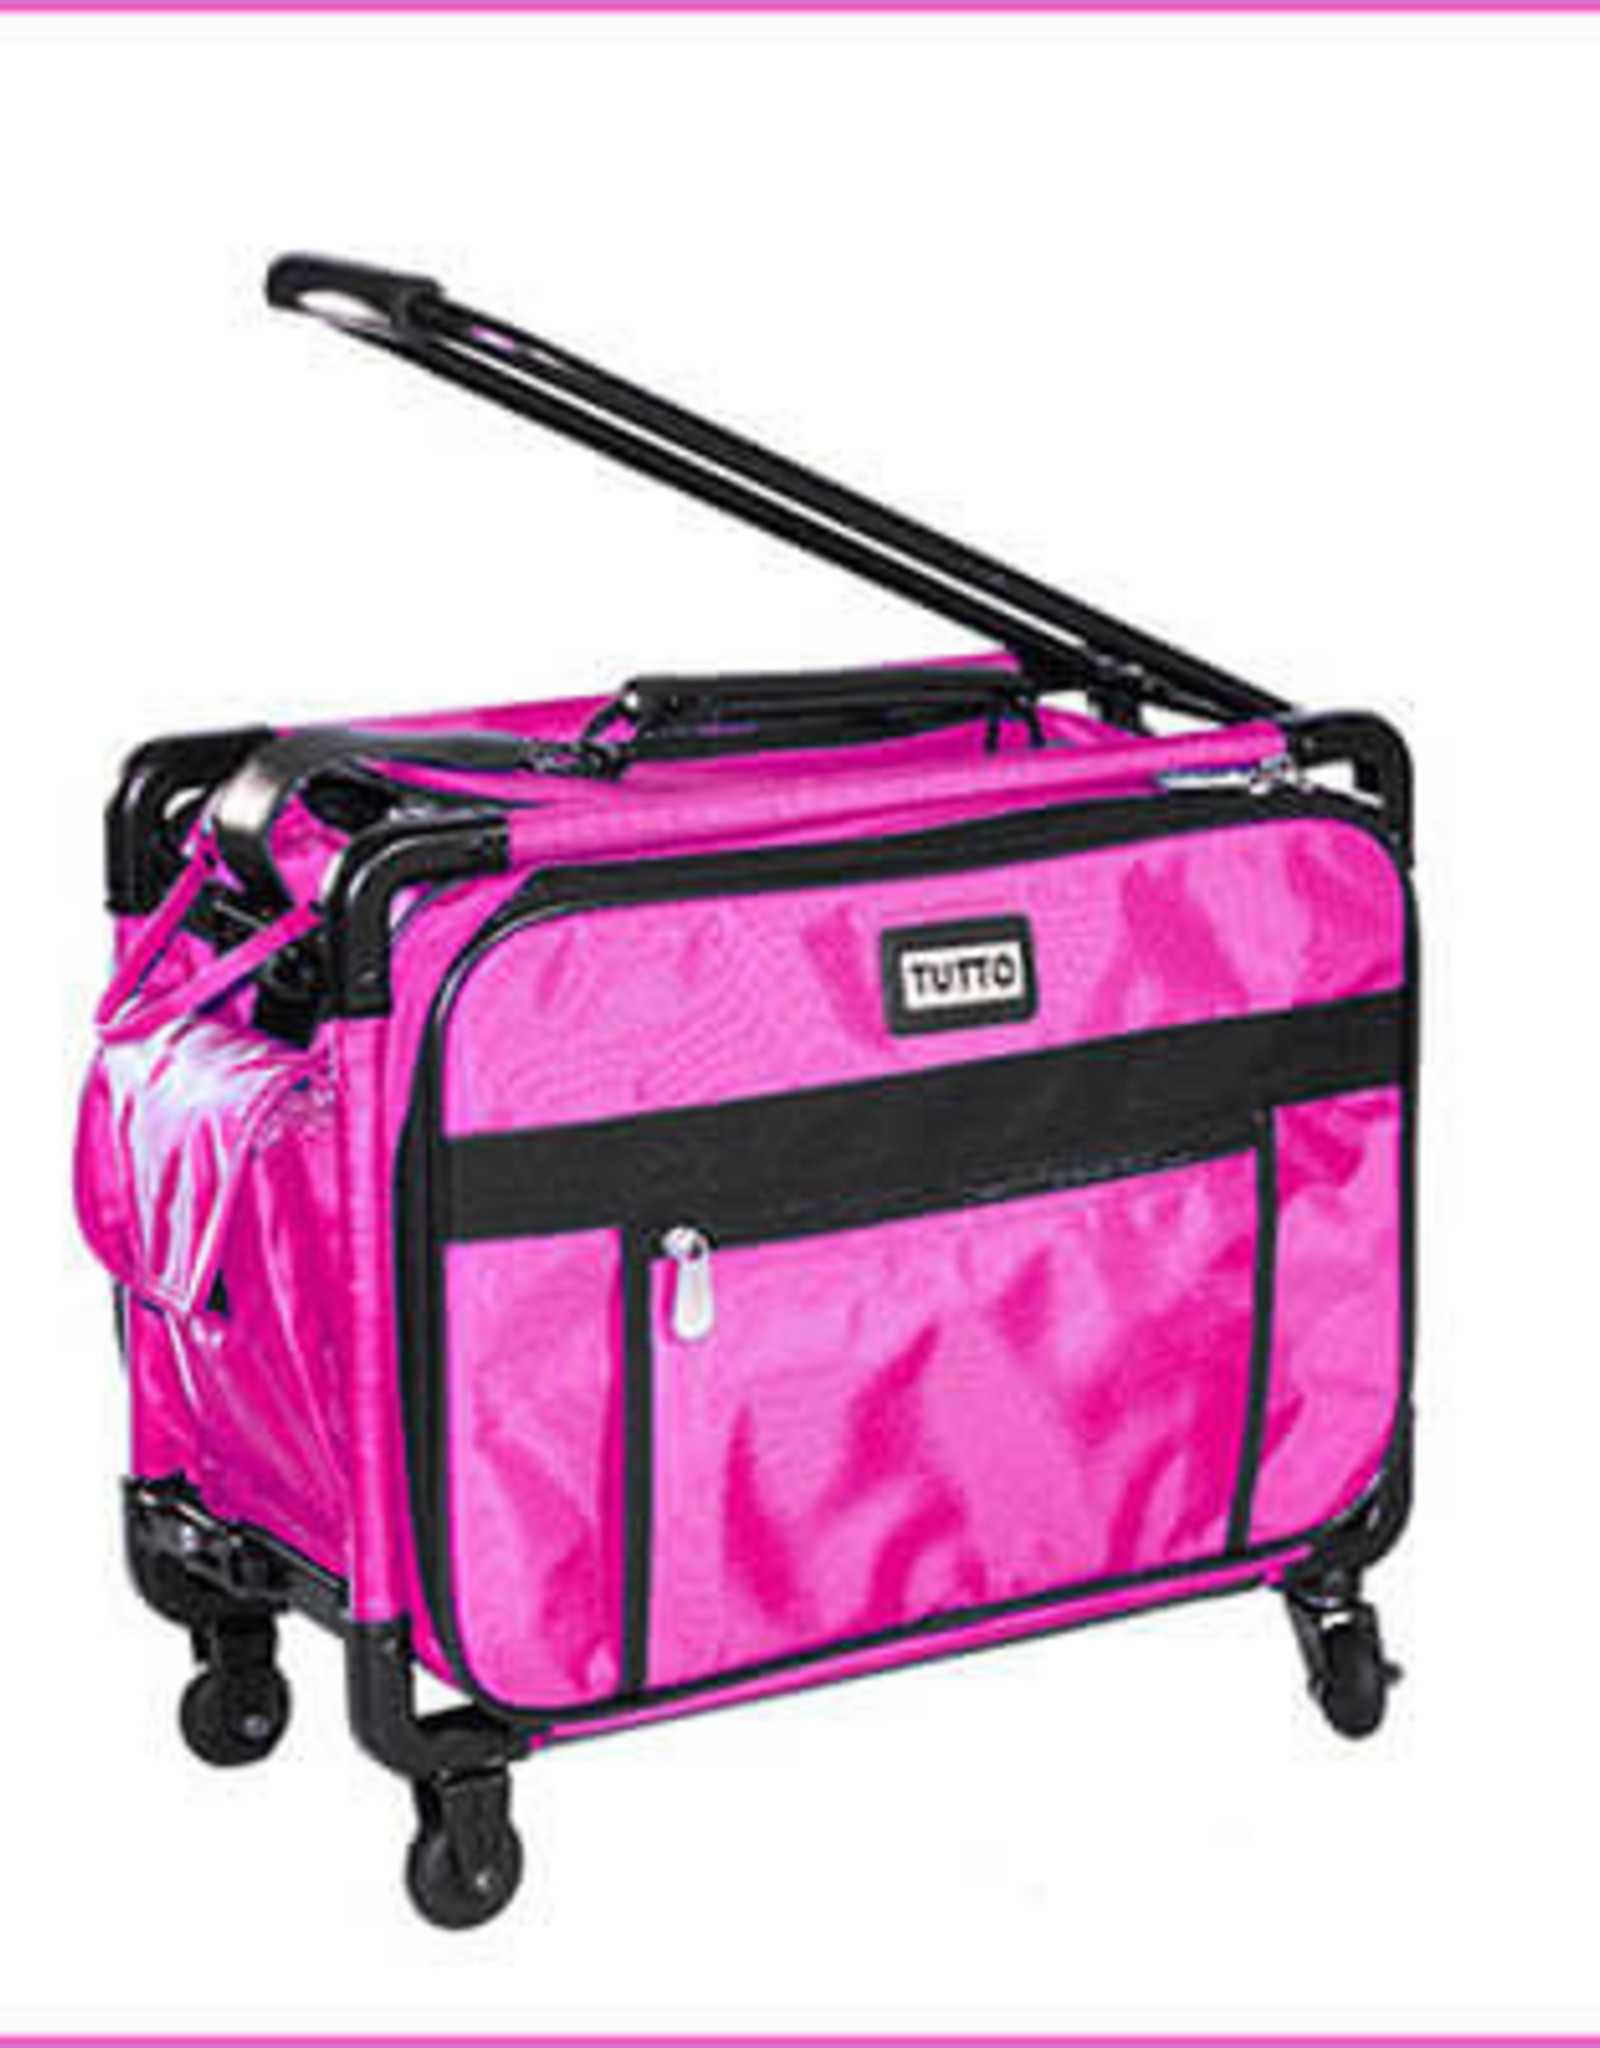 Tutto 17" small roller case - PINK